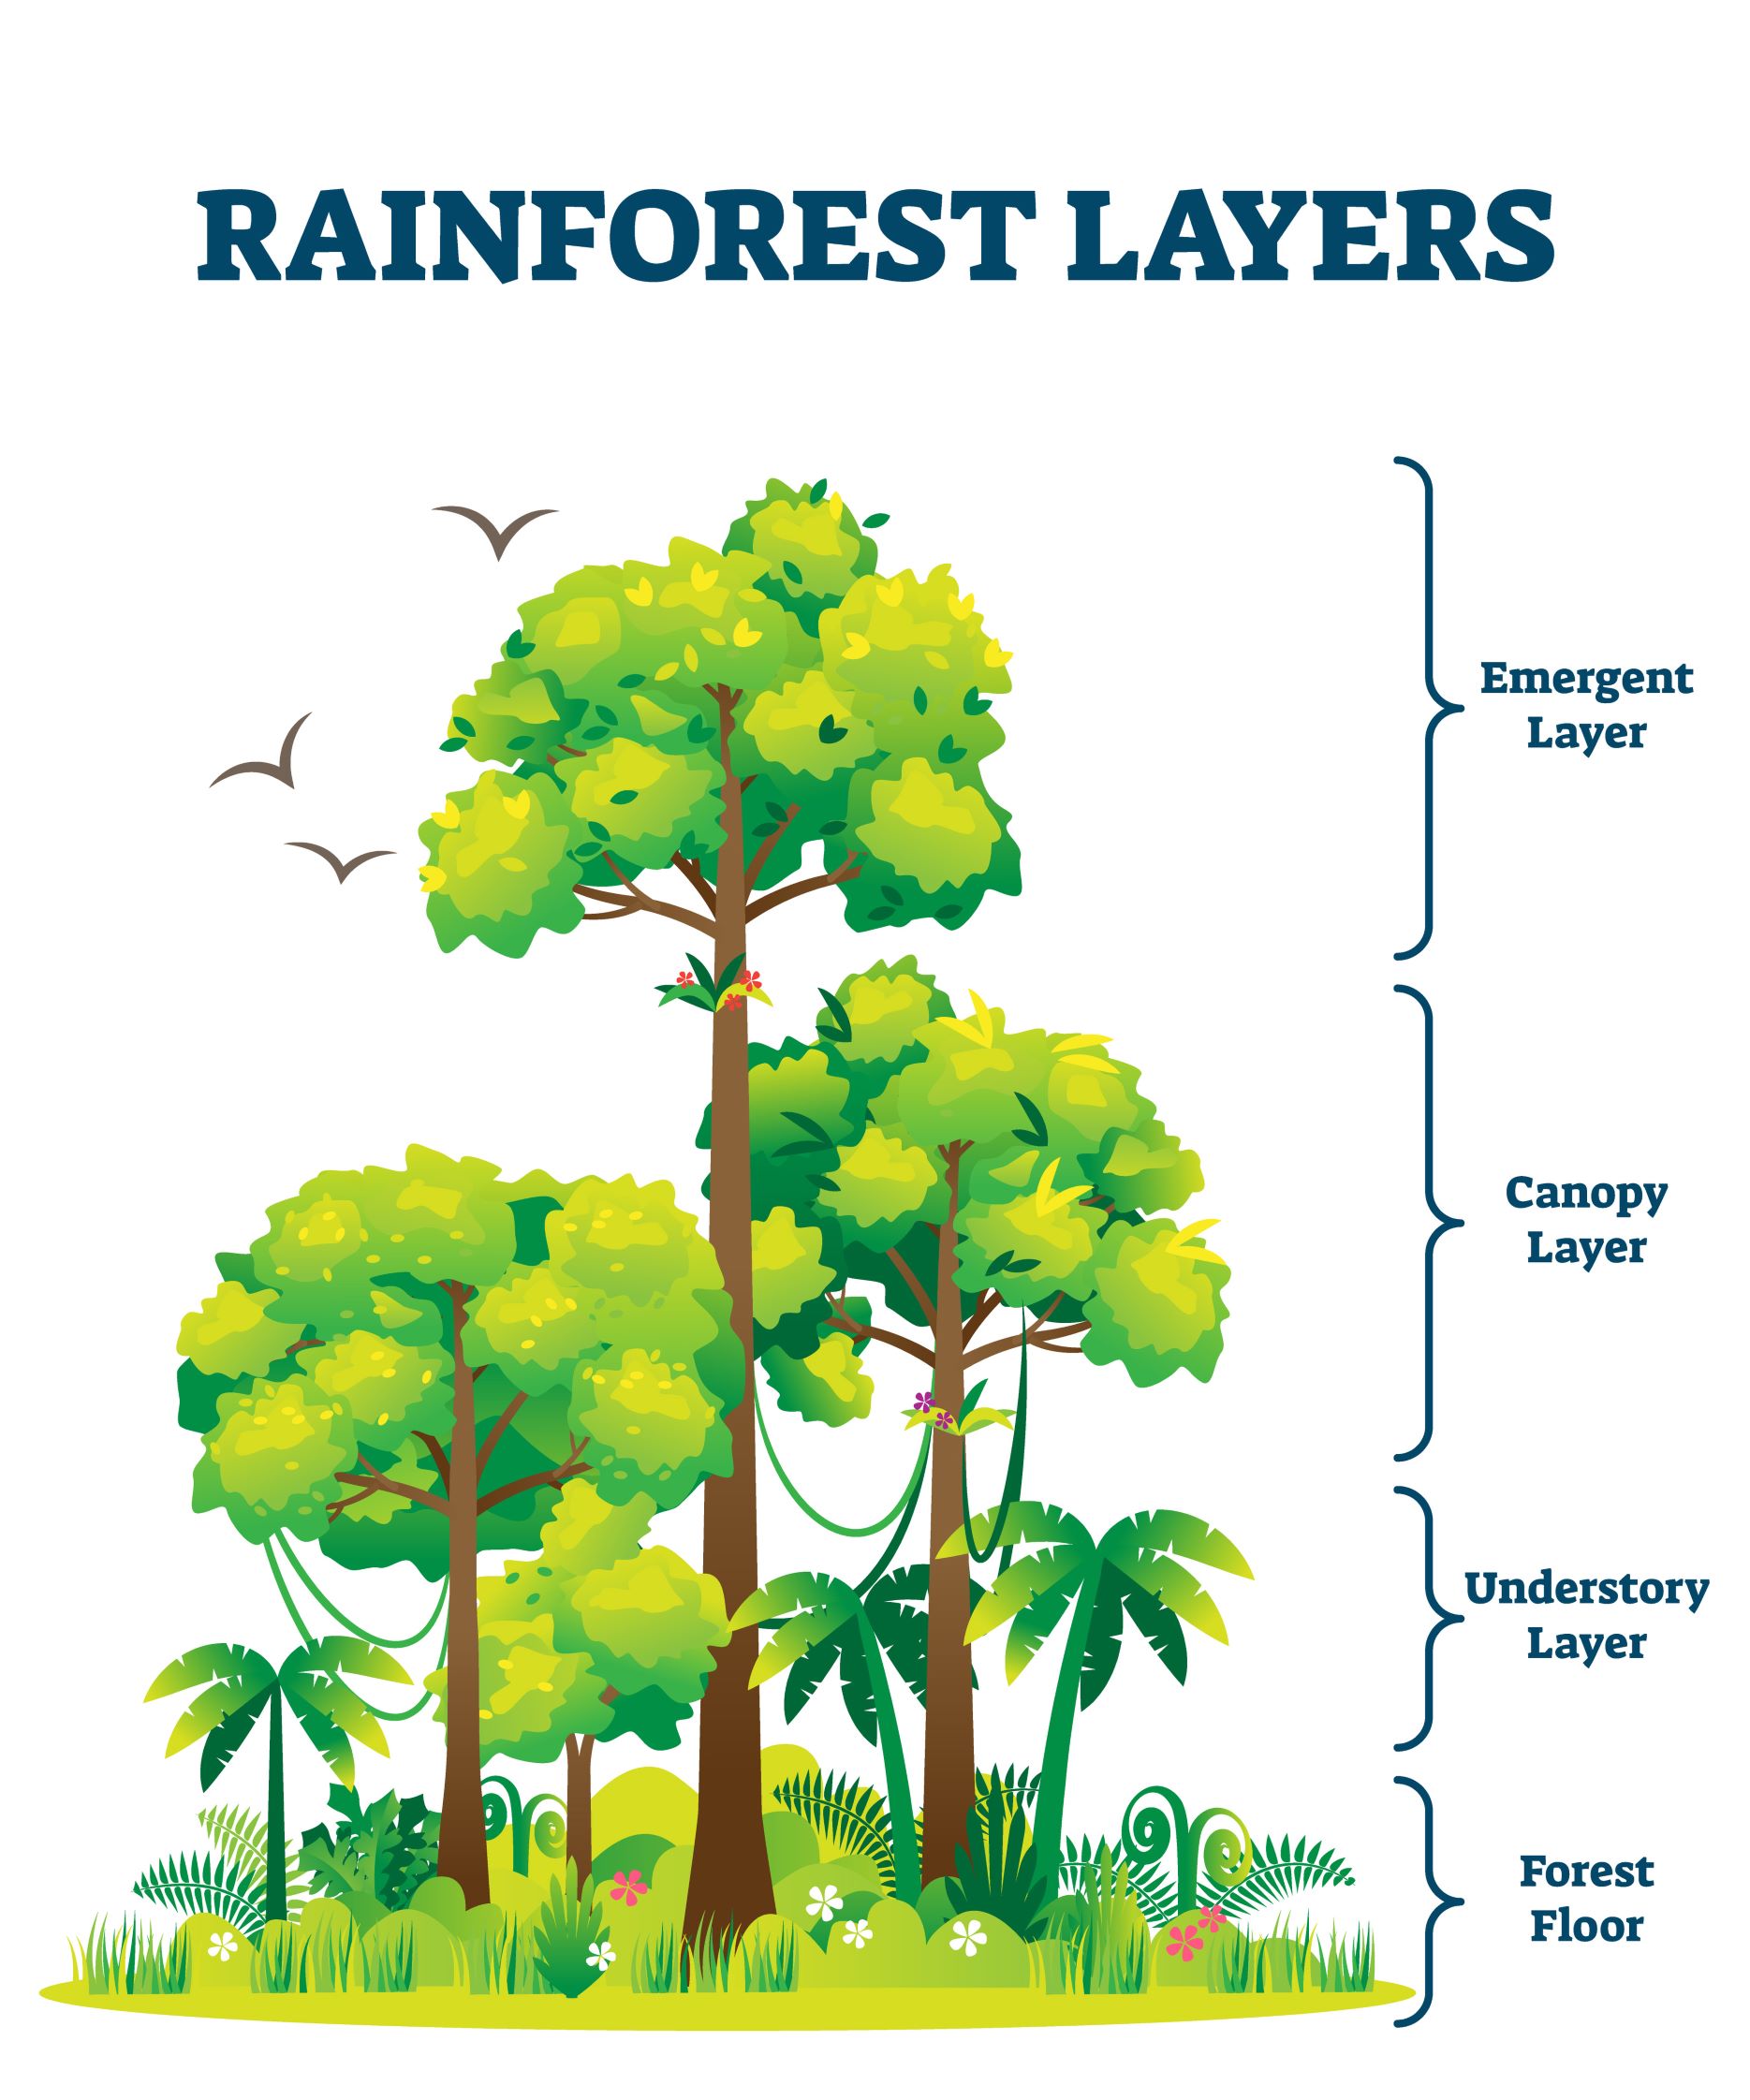 forests like rainforests have different layers